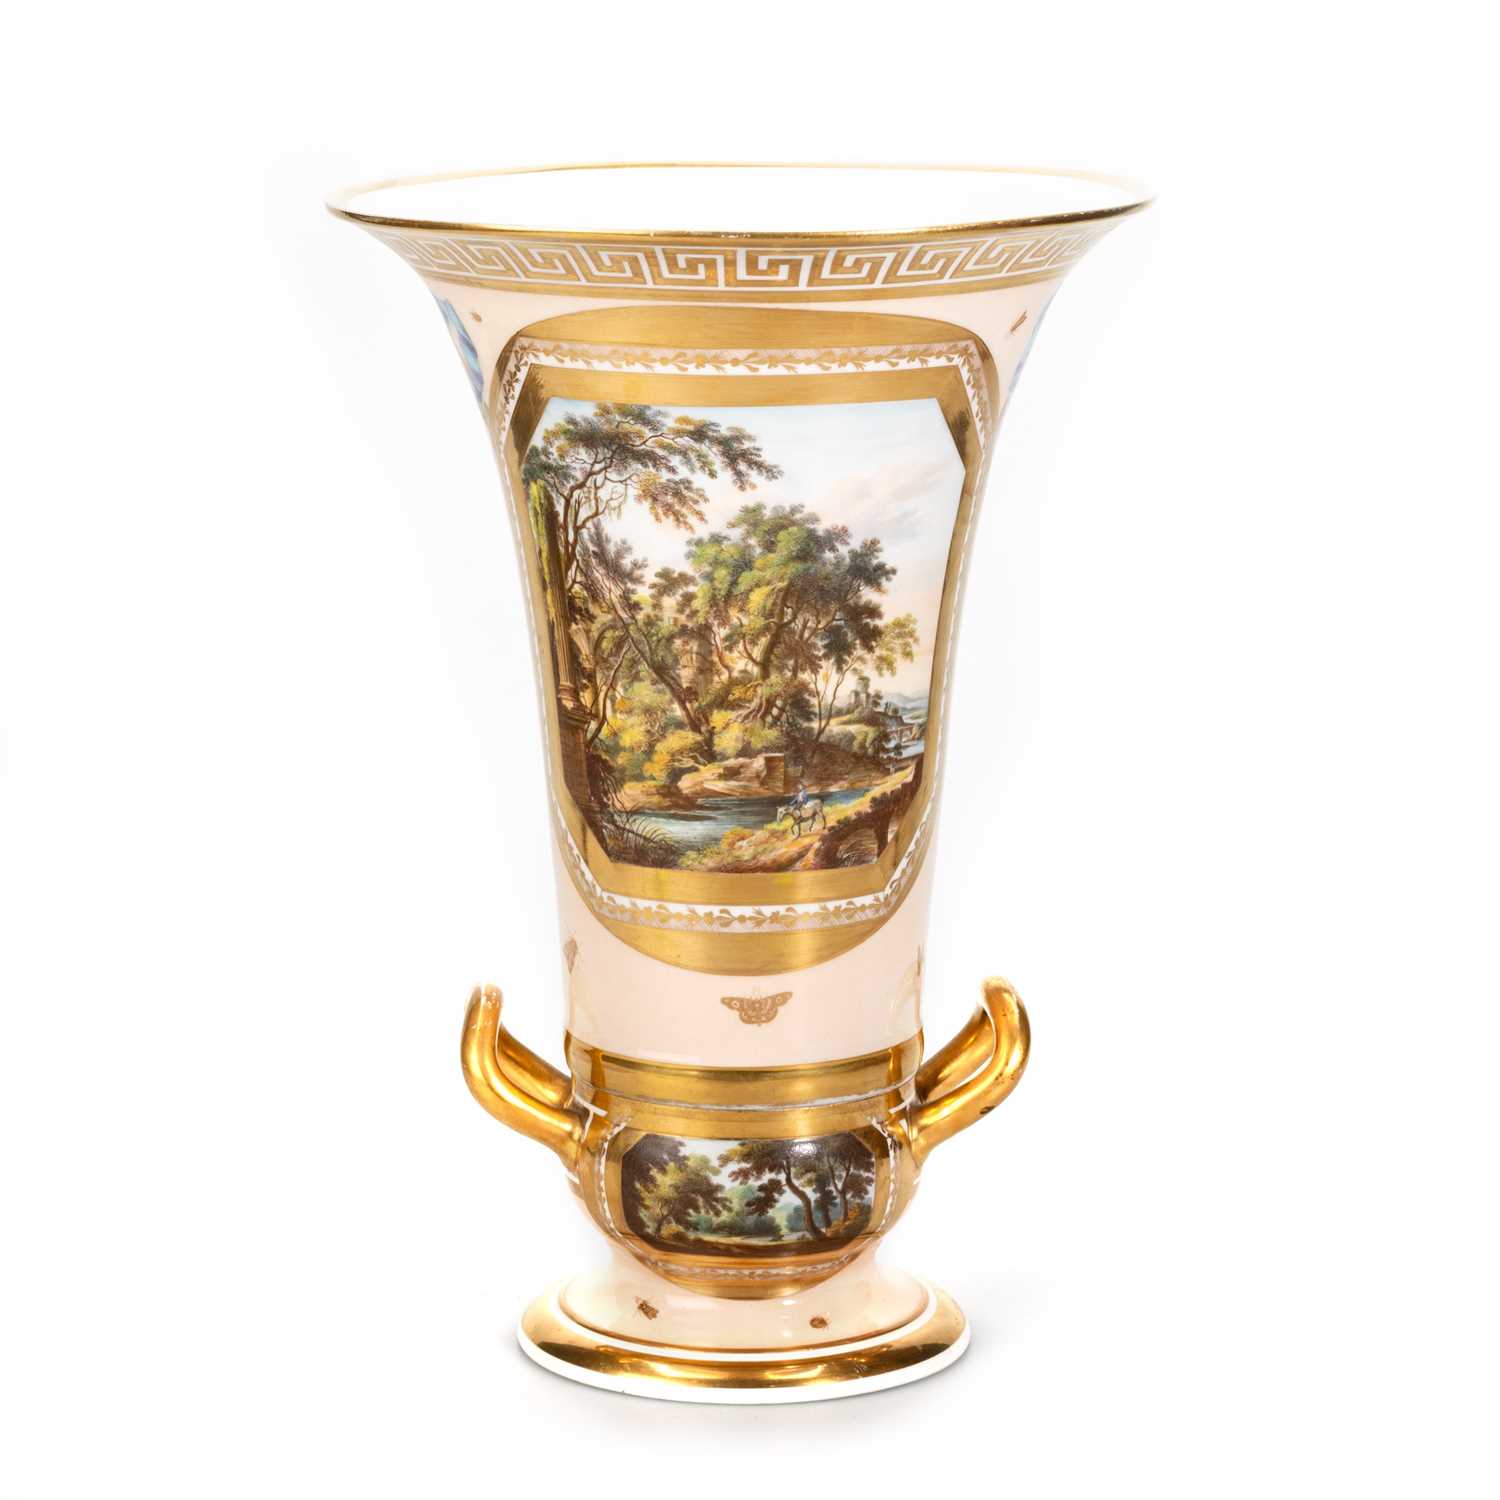 Lot 61 - A RARE DERBY VASE AND STAND, PAINTED IN THE MANNER OF DANIEL LUCAS, CIRCA 1810